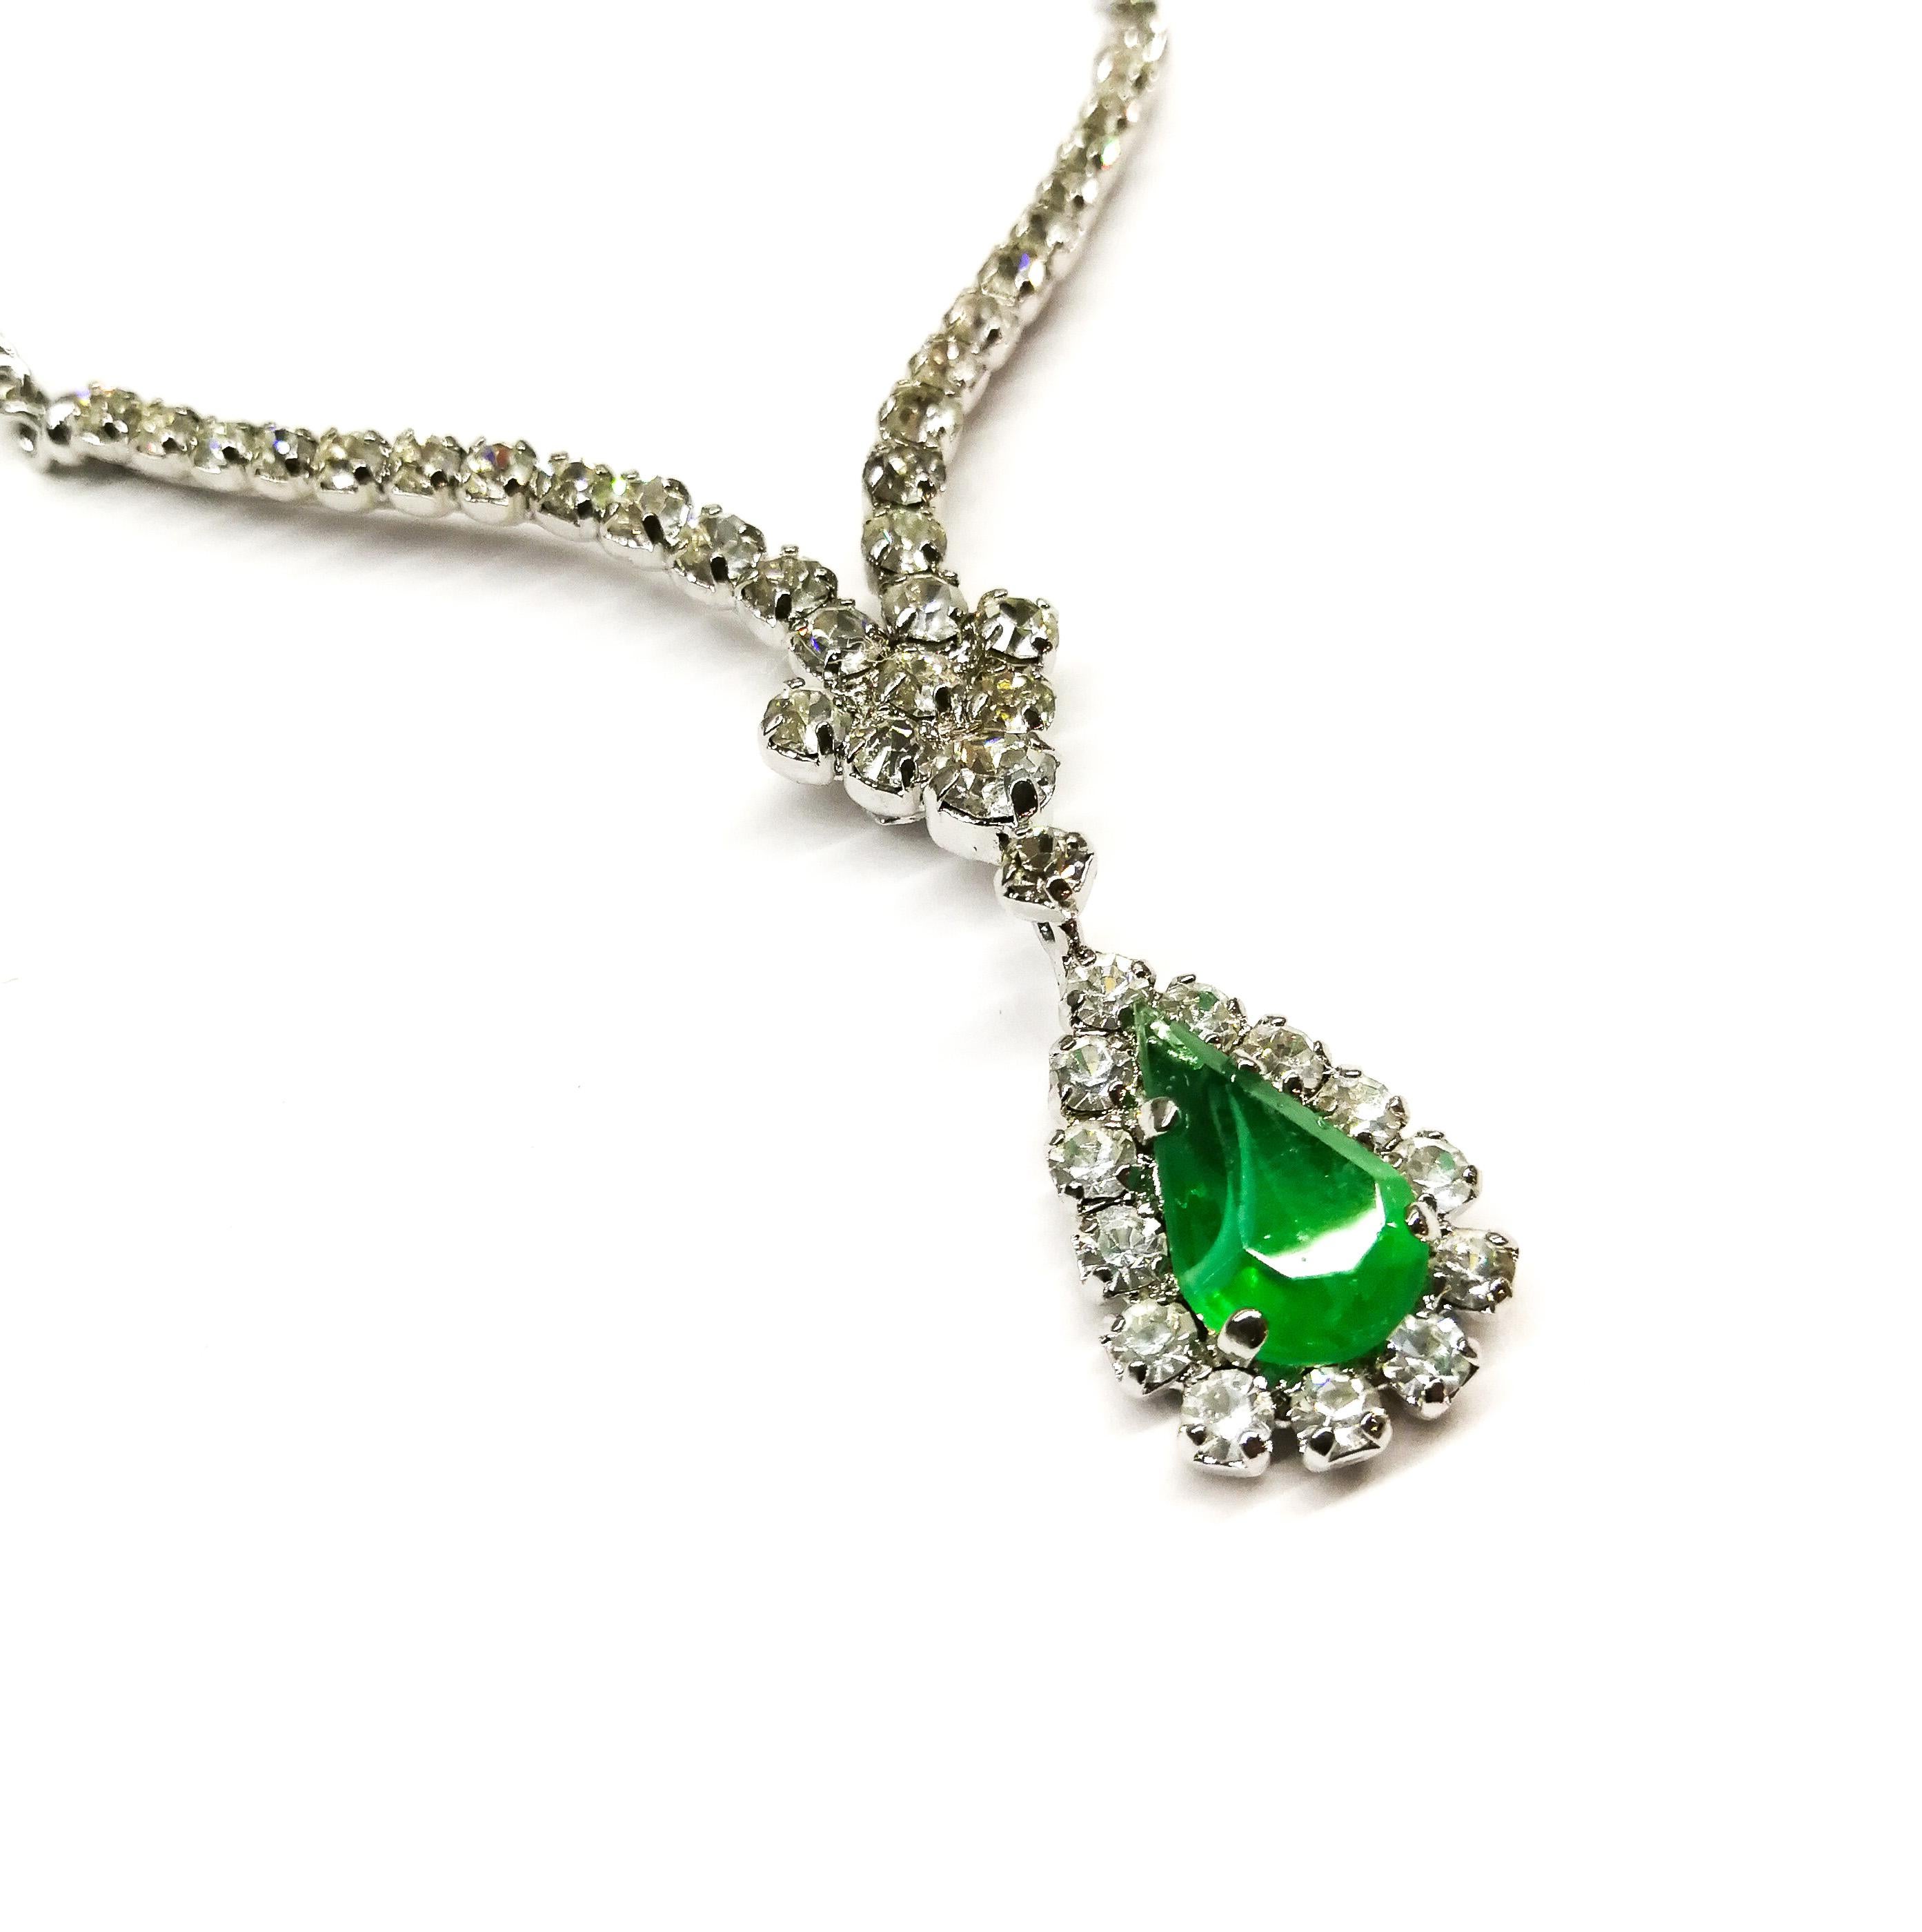 A charming and delicate drop necklace made by Henkel and Grosse for Christian Dior in the 1970s. A very fine chain, with a clasp that can be varied in length to suit the wearer, continues to a V shaped clear paste pendant with a beautiful 'emerald'